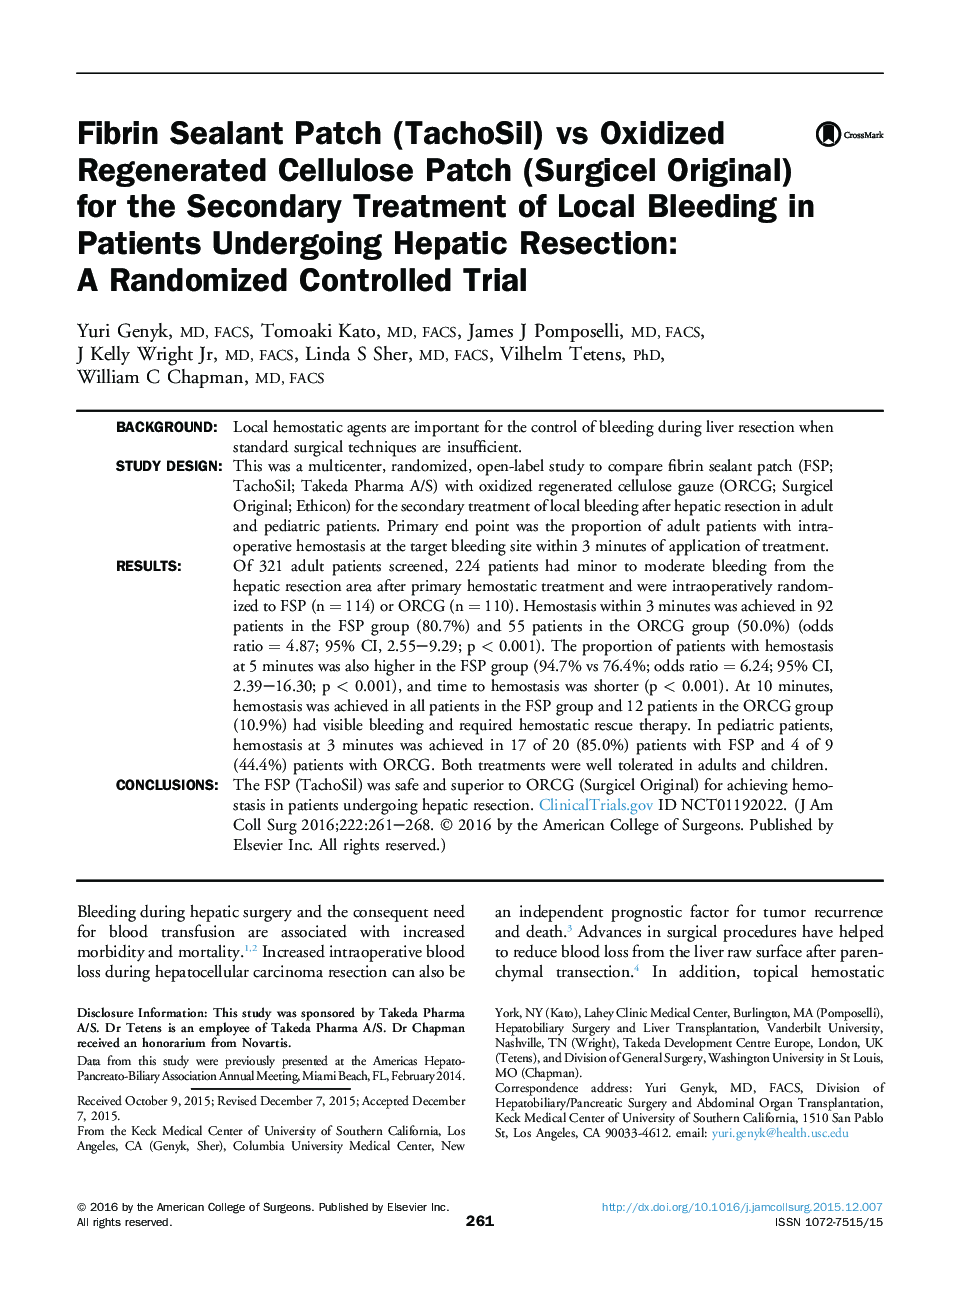 Fibrin Sealant Patch (TachoSil) vs Oxidized Regenerated Cellulose Patch (Surgicel Original) for the Secondary Treatment of Local Bleeding in Patients Undergoing Hepatic Resection: A Randomized Controlled Trial 